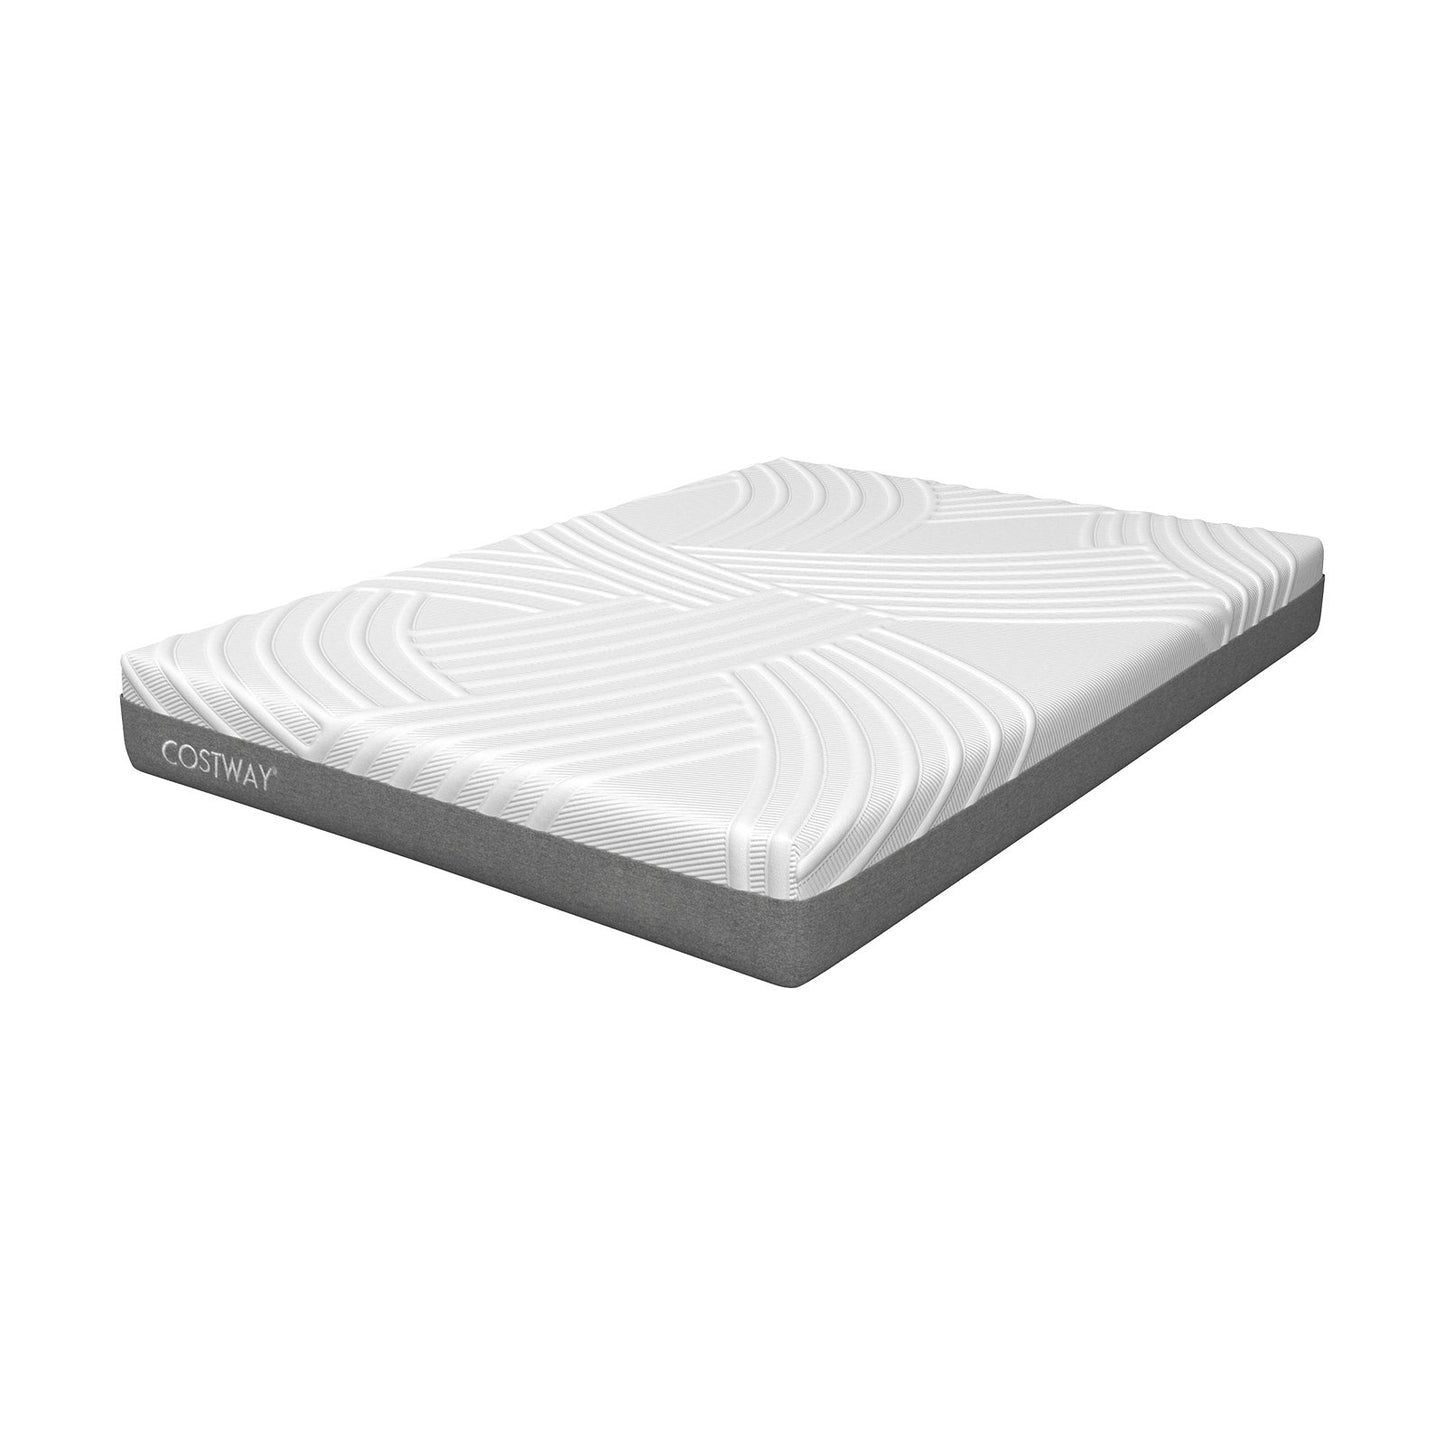 75L x 54W x 8H Memory Foam Mattress with Jacquard Fabric Cover-Full Size, White at Gallery Canada